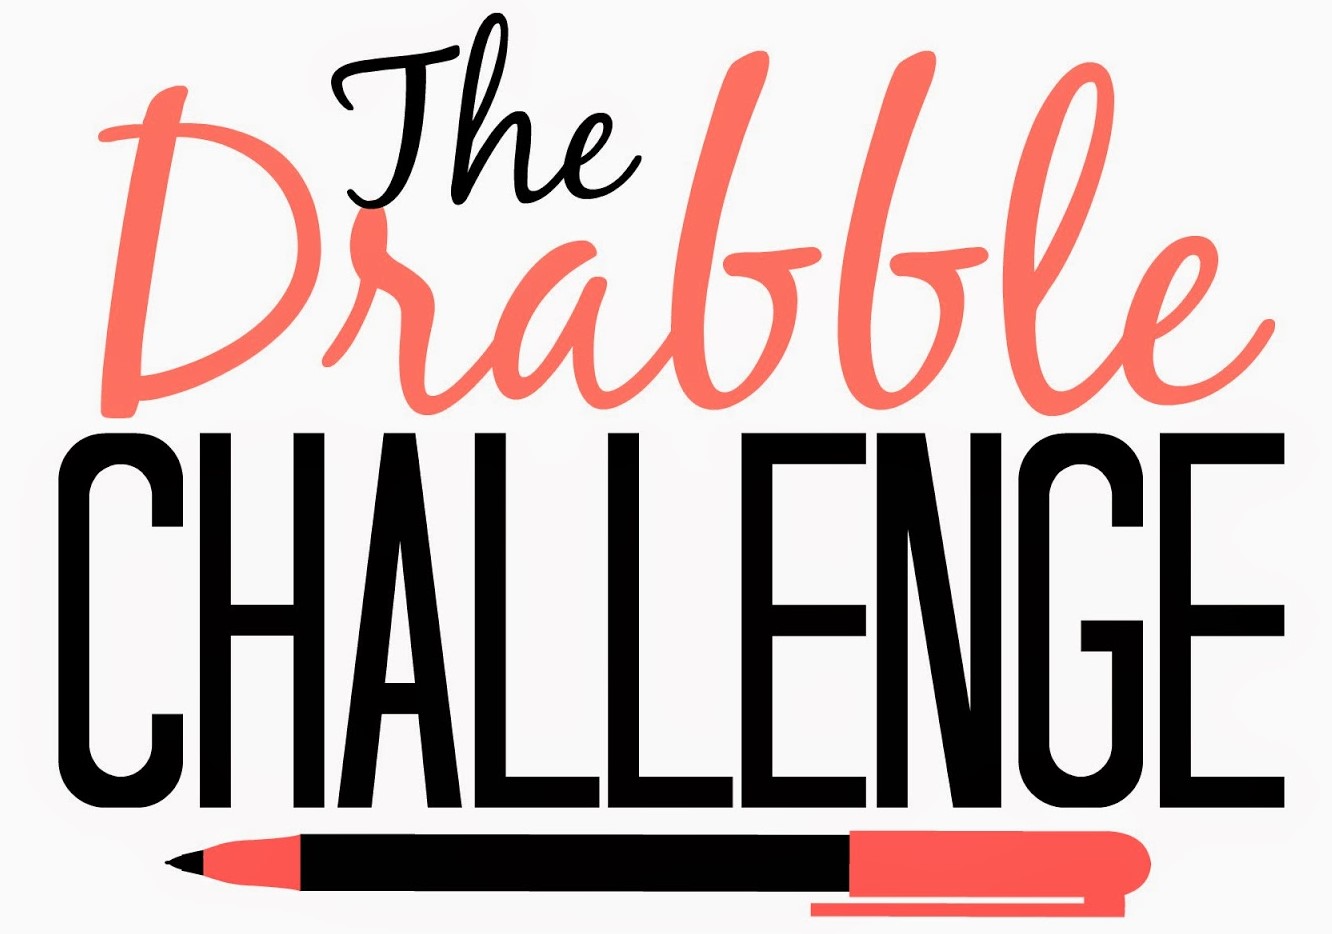 Image of text: The Drabble Challenge. With a pen underneath the text.